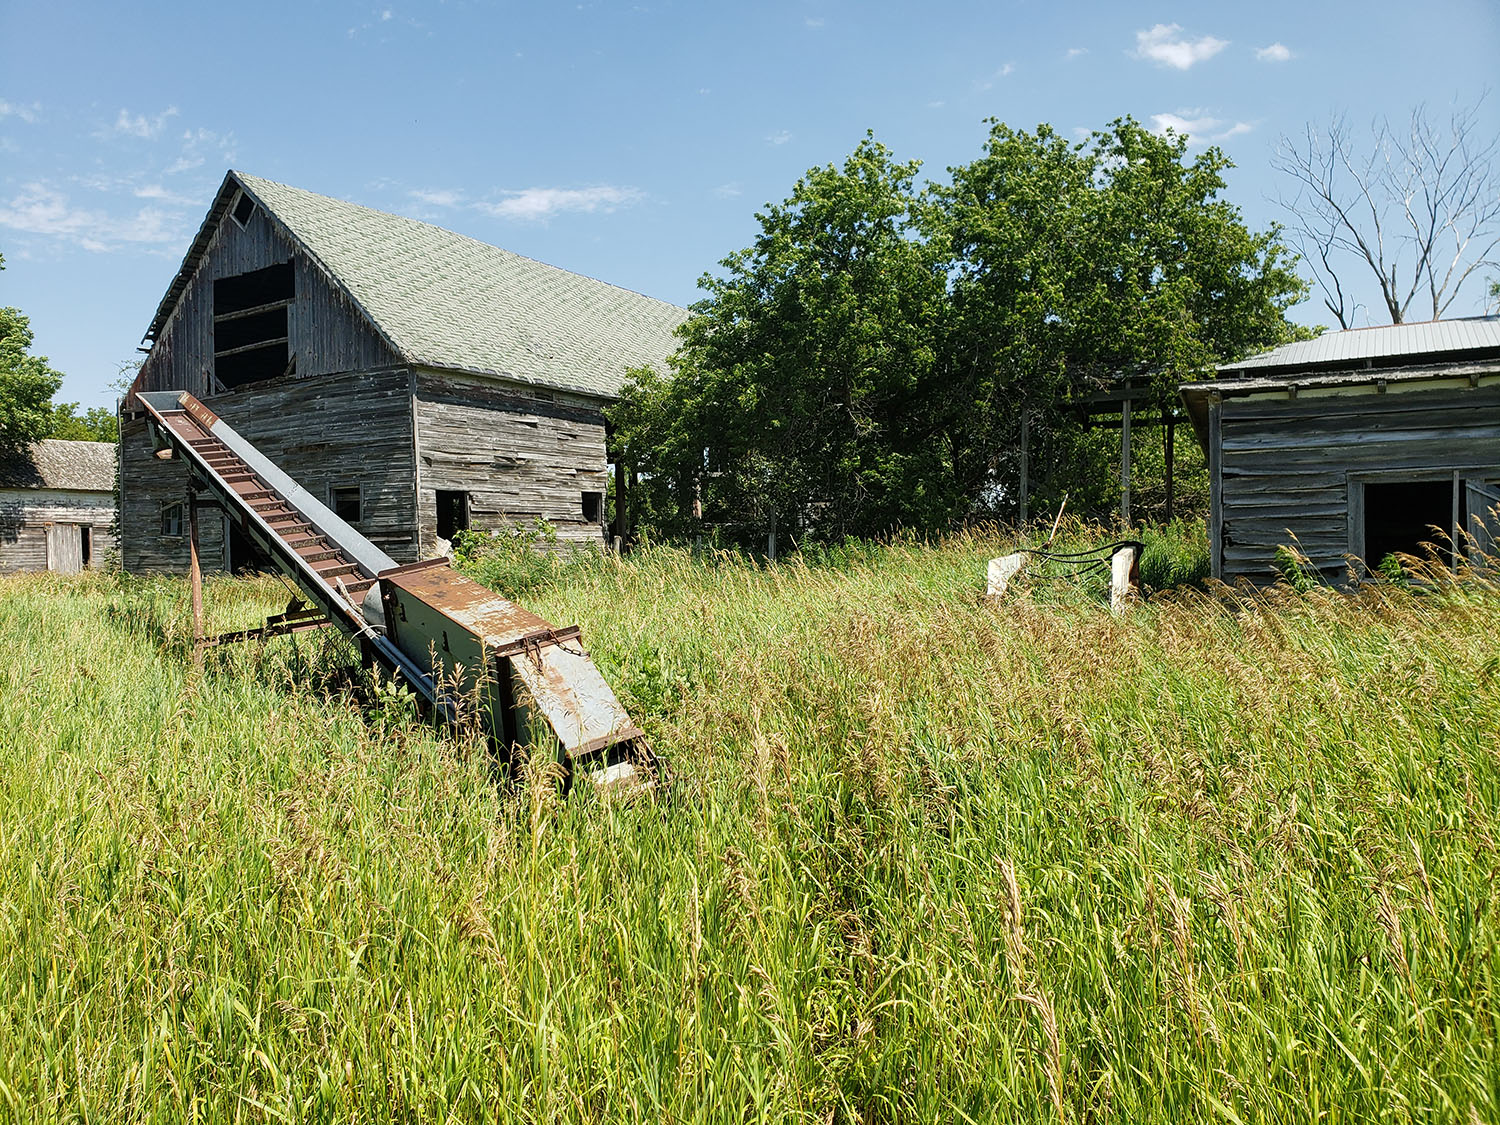 Green grassy field with old farm equipment and barn in the background